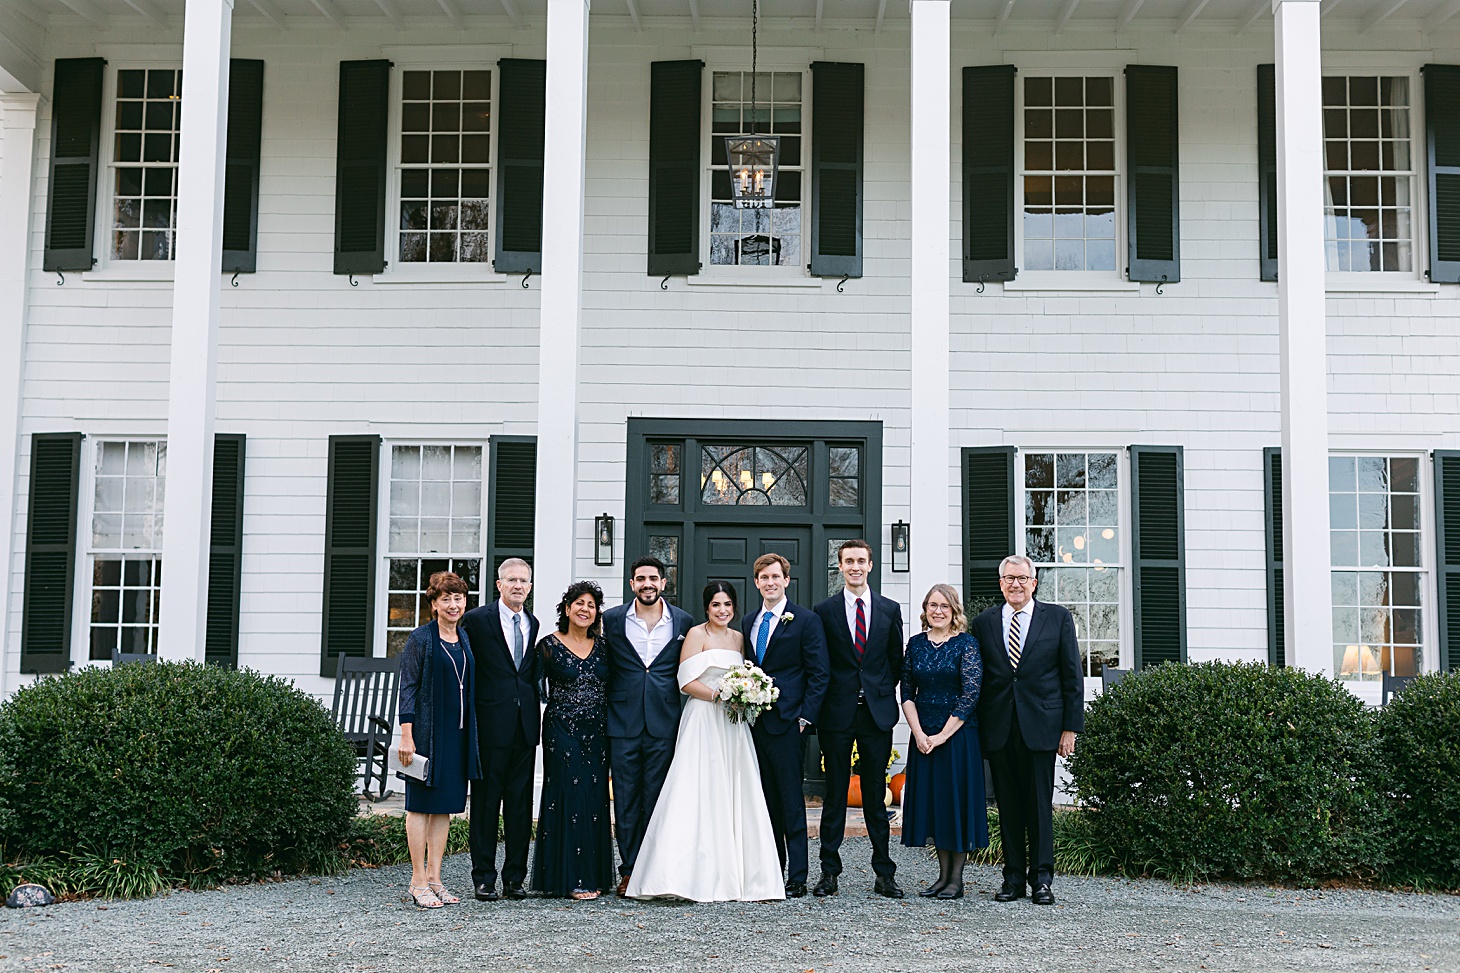 Family portraits at wedding at The Clifton Charlottesville by Sarah Bradshaw Photography